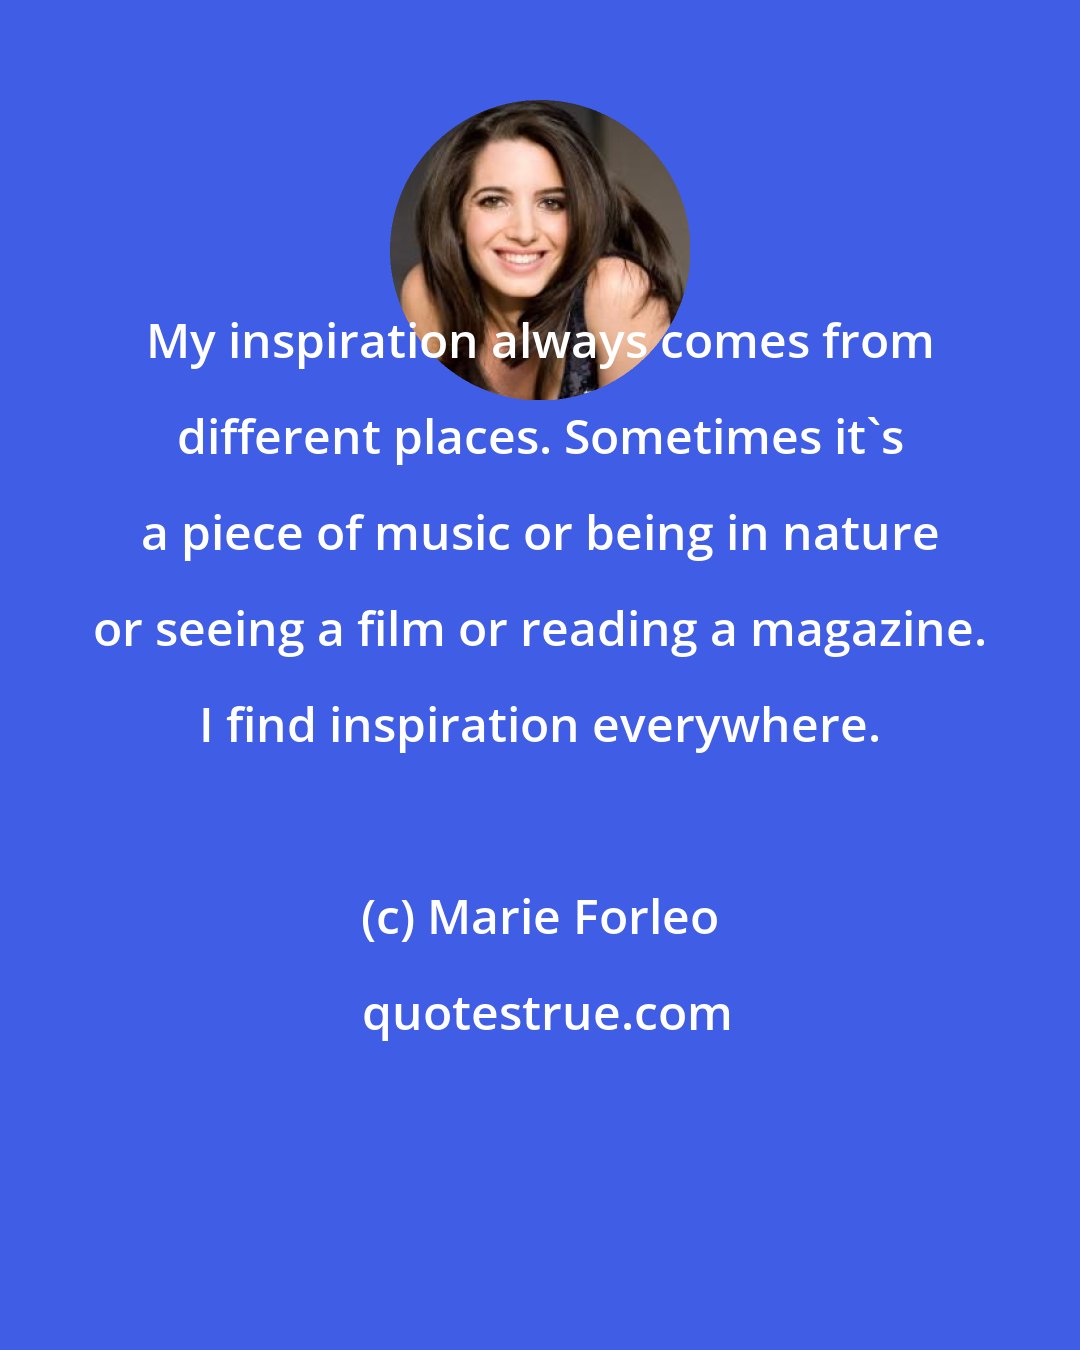 Marie Forleo: My inspiration always comes from different places. Sometimes it's a piece of music or being in nature or seeing a film or reading a magazine. I find inspiration everywhere.